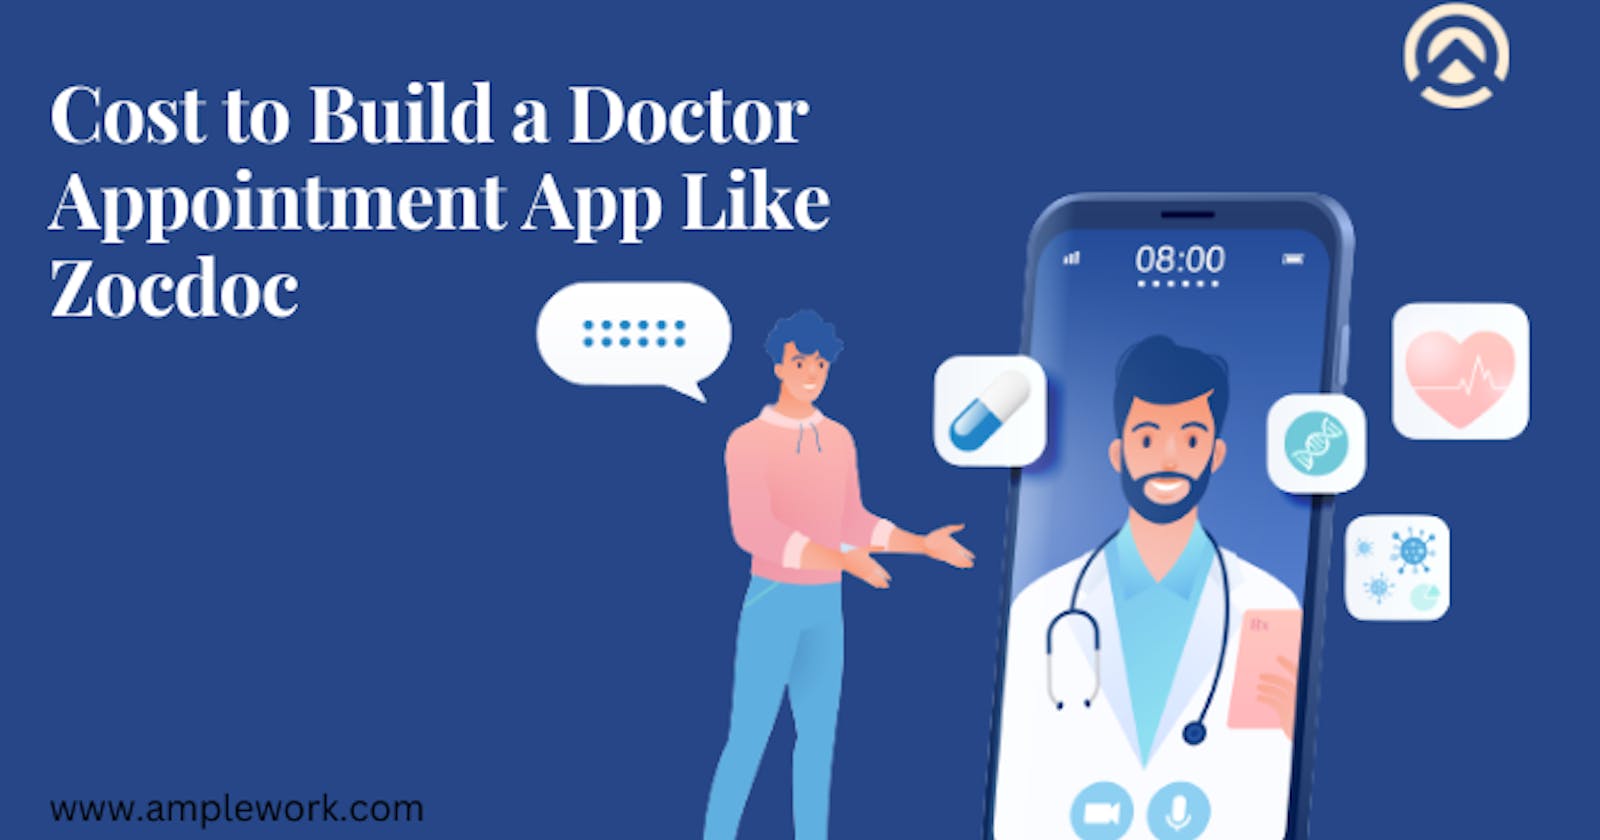 How Much Does it Cost to Build a Doctor Appointment App Like Zocdoc?